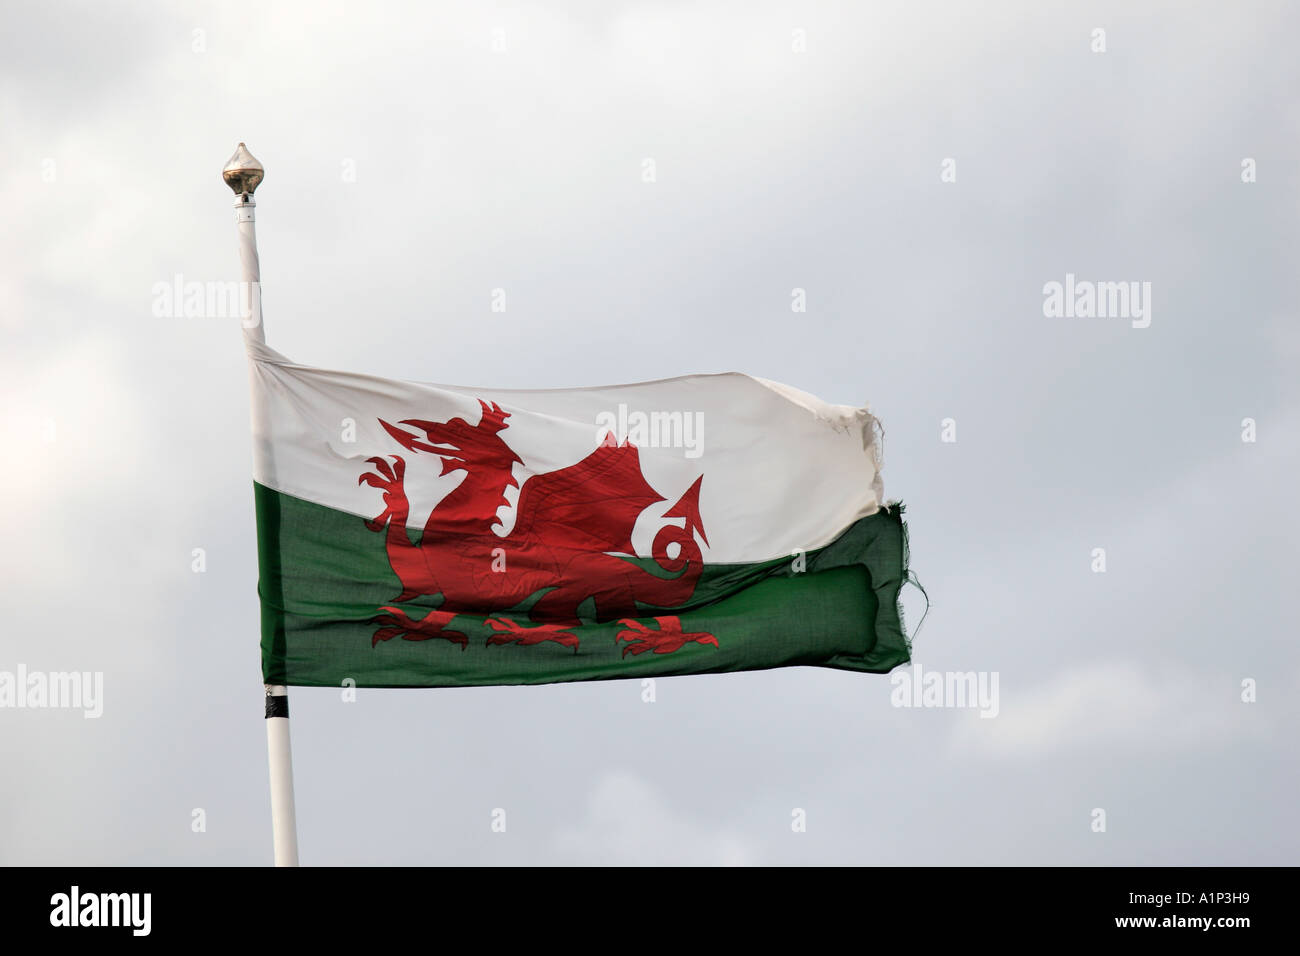 THE FLAG OF WALES FLYING FROM A FLAGPOLE IN THE BREEZE. Stock Photo